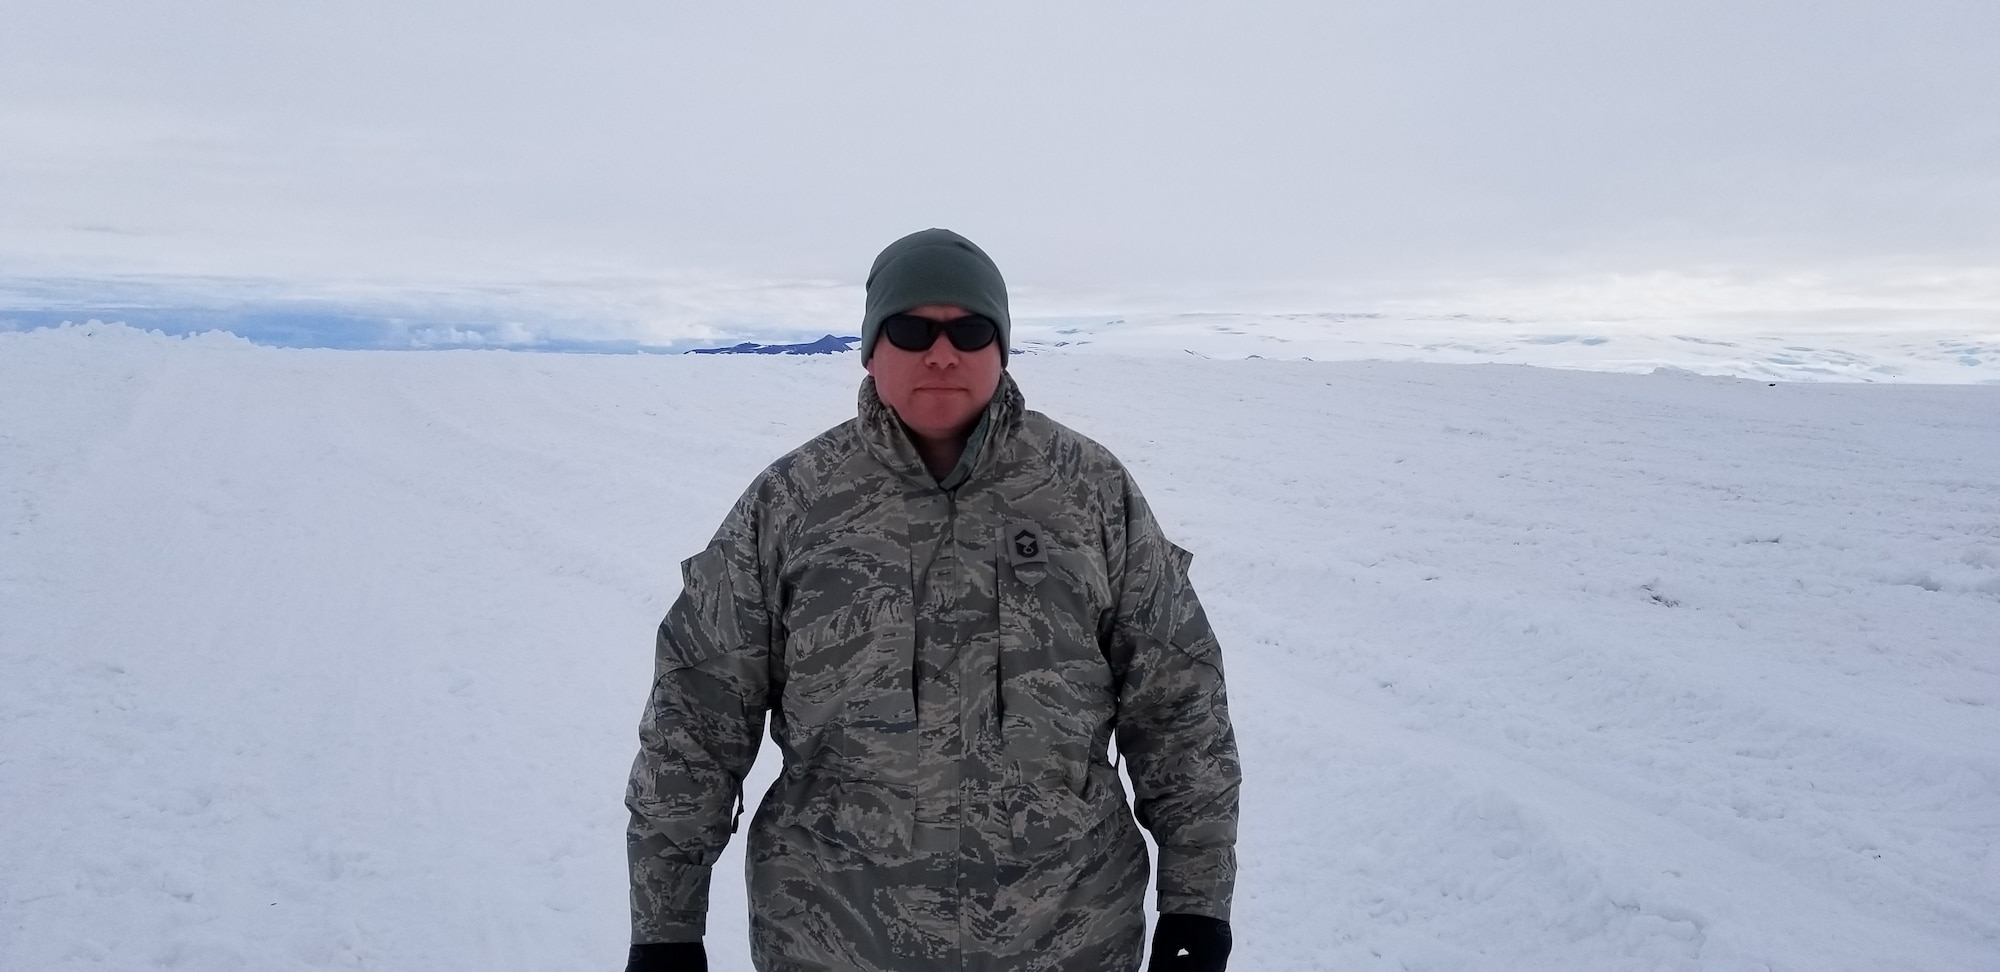 Senior Master Sgt. Joseph Carter, an occupational safety and health manager assigned to the 180th Fighter Wing, Ohio Air National Guard, spent two months in Antarctica on a mission to improve safety procedures for the Airmen of the New York Air National Guard’s 109th Airlift Wing, giving them a better chance to survive and operate in the most inhospitable place on Earth. The Airmen in Antarctica support Operation Deep Freeze, the military component of the U.S. Antarctic Program, managed by the National Science Foundation.